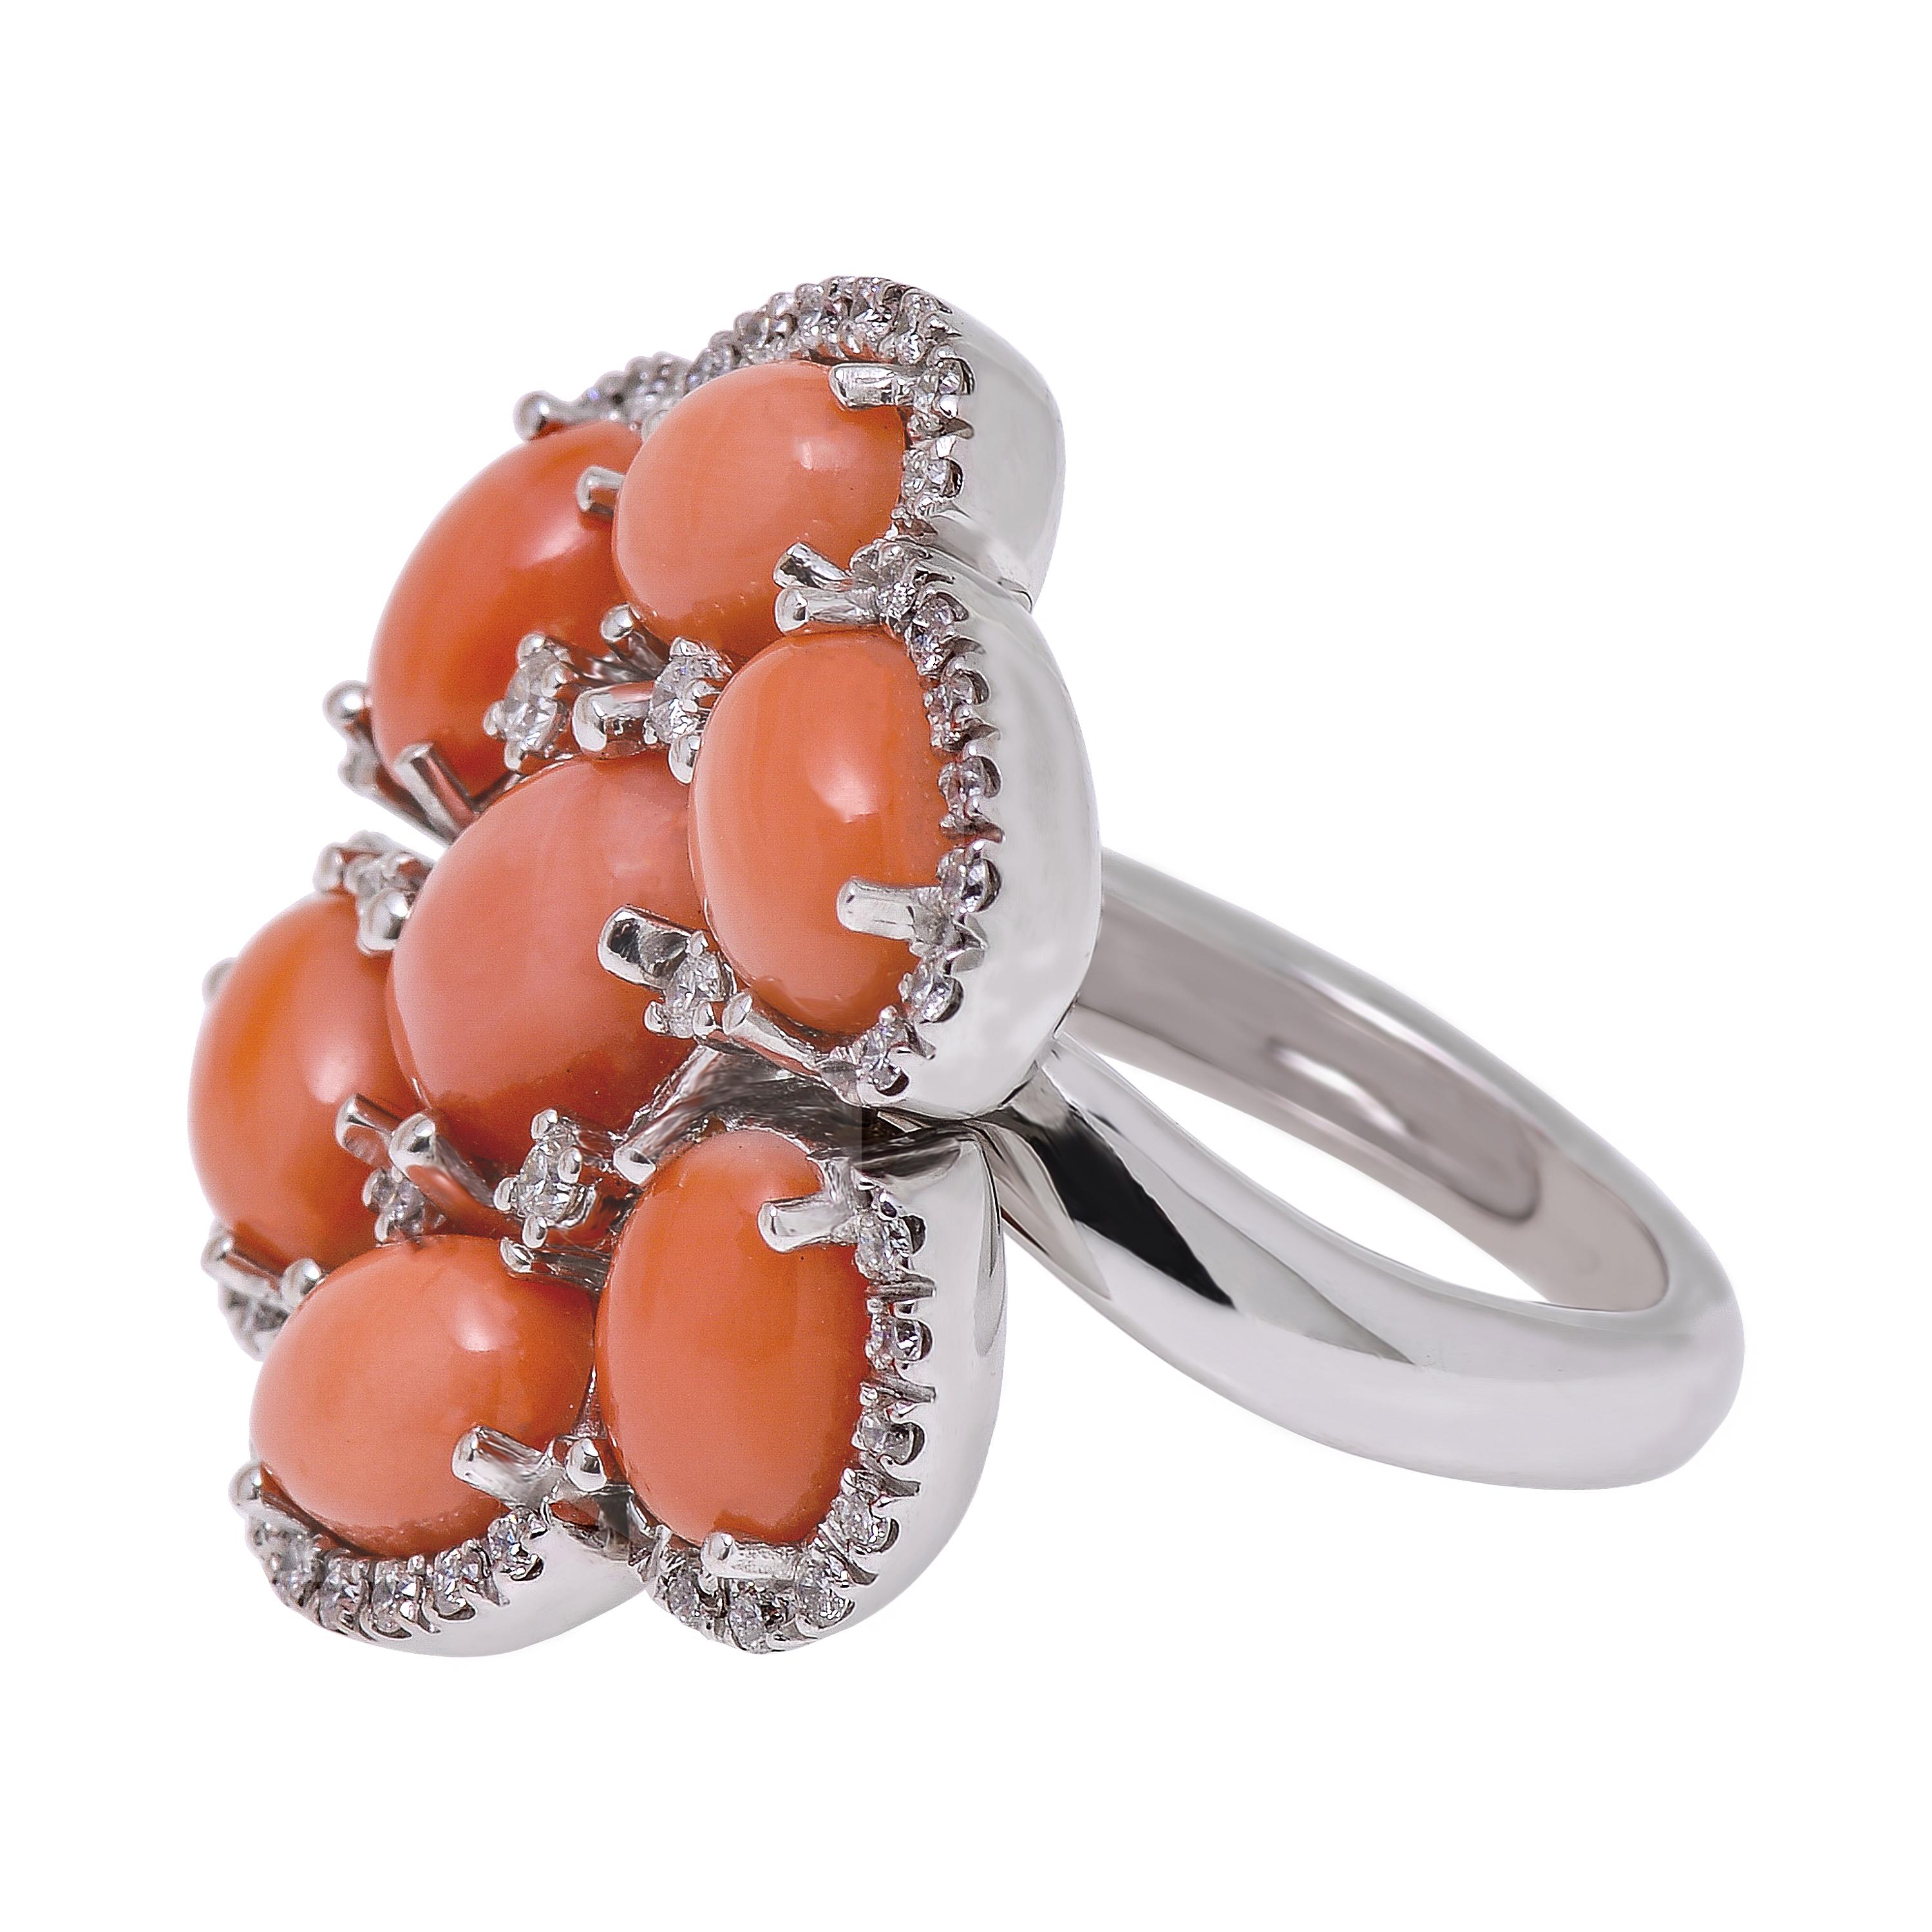 Contemporary Zydo 18K White Gold Diamond and Coral Ring Sz 7.25 For Sale